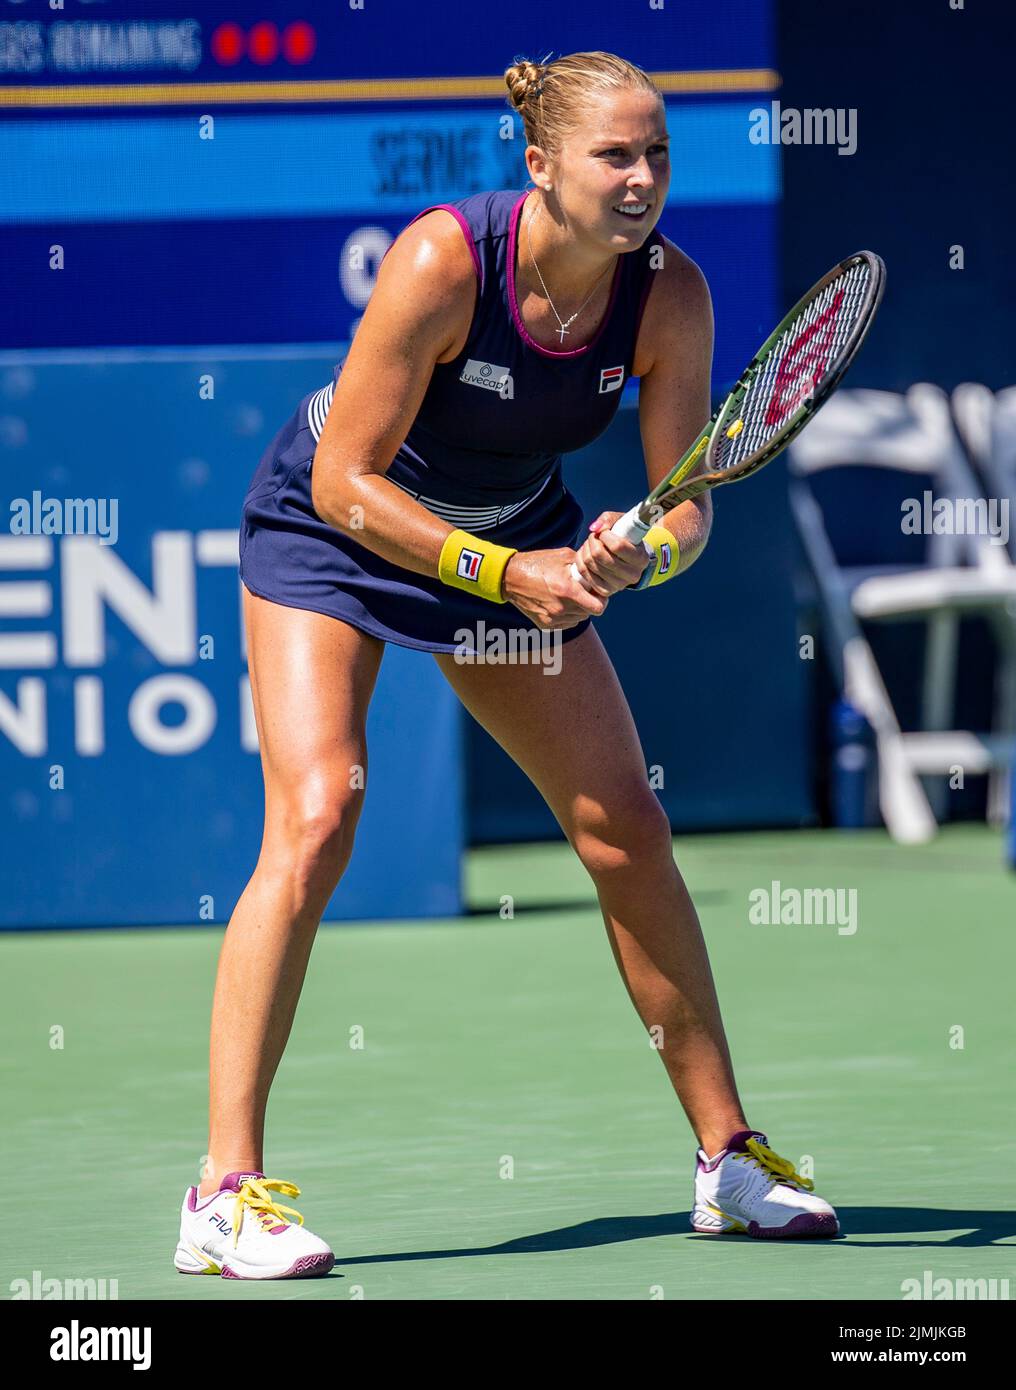 August 06, 2022 San Jose, CA USA Shelby Rogers waits for the ball during the Mubadala Silicon Valley Classic Semifinals Day Session between Shelby Rogers (USA) vs Veronika Kudermetova (RUS) at San Jose State University San Jose Calif. Thurman James/CSM Stock Photo